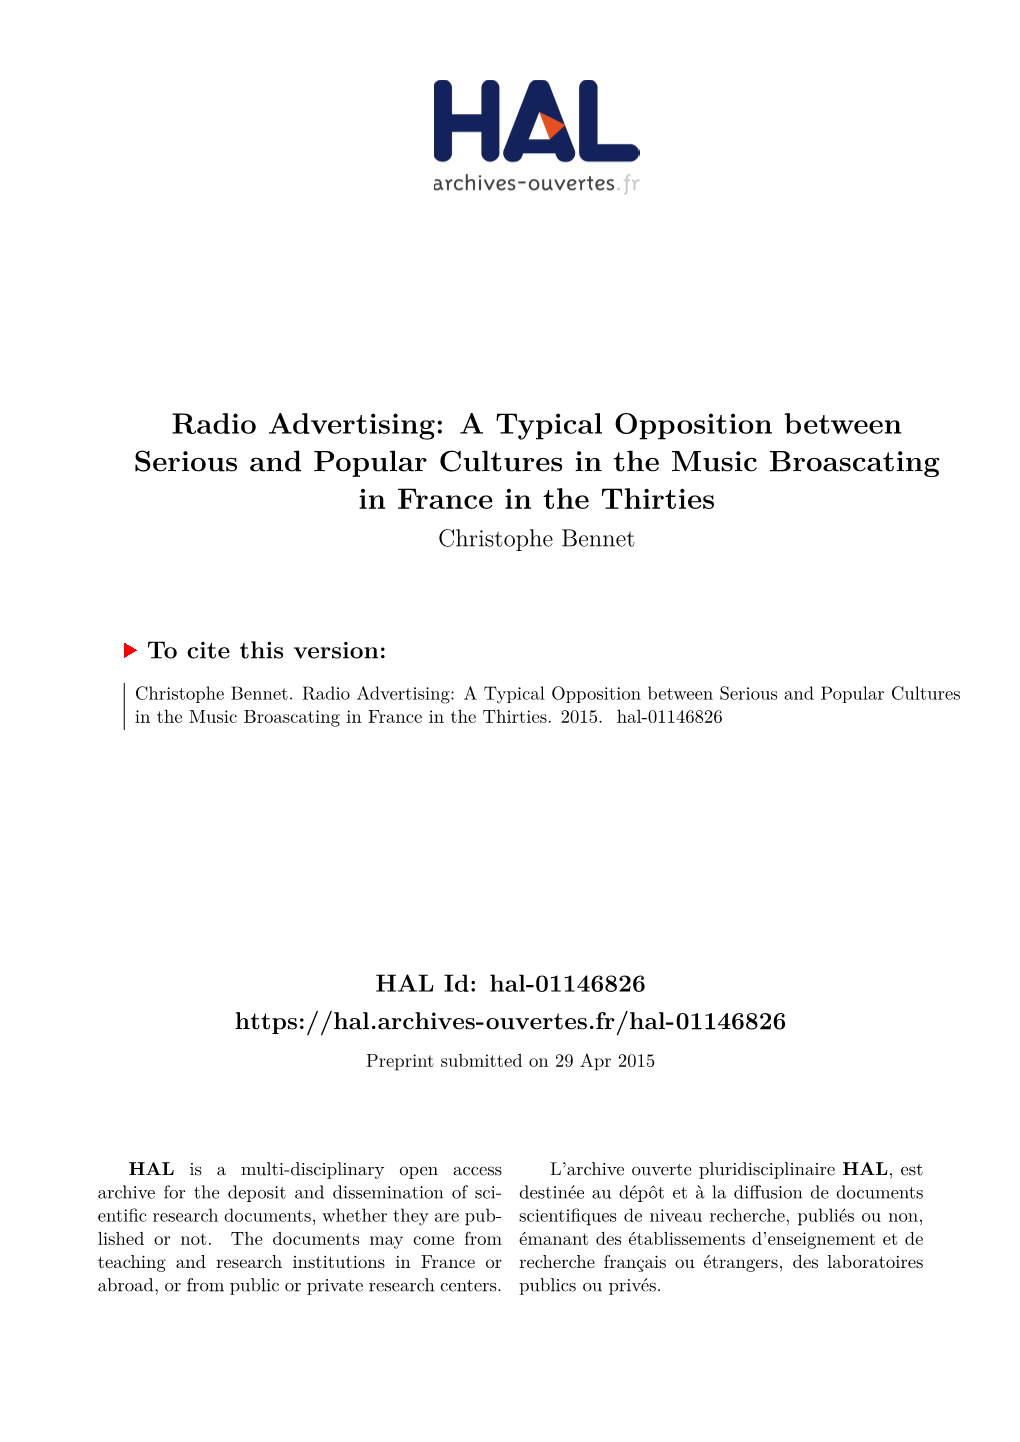 Radio Advertising: a Typical Opposition Between Serious and Popular Cultures in the Music Broascating in France in the Thirties Christophe Bennet